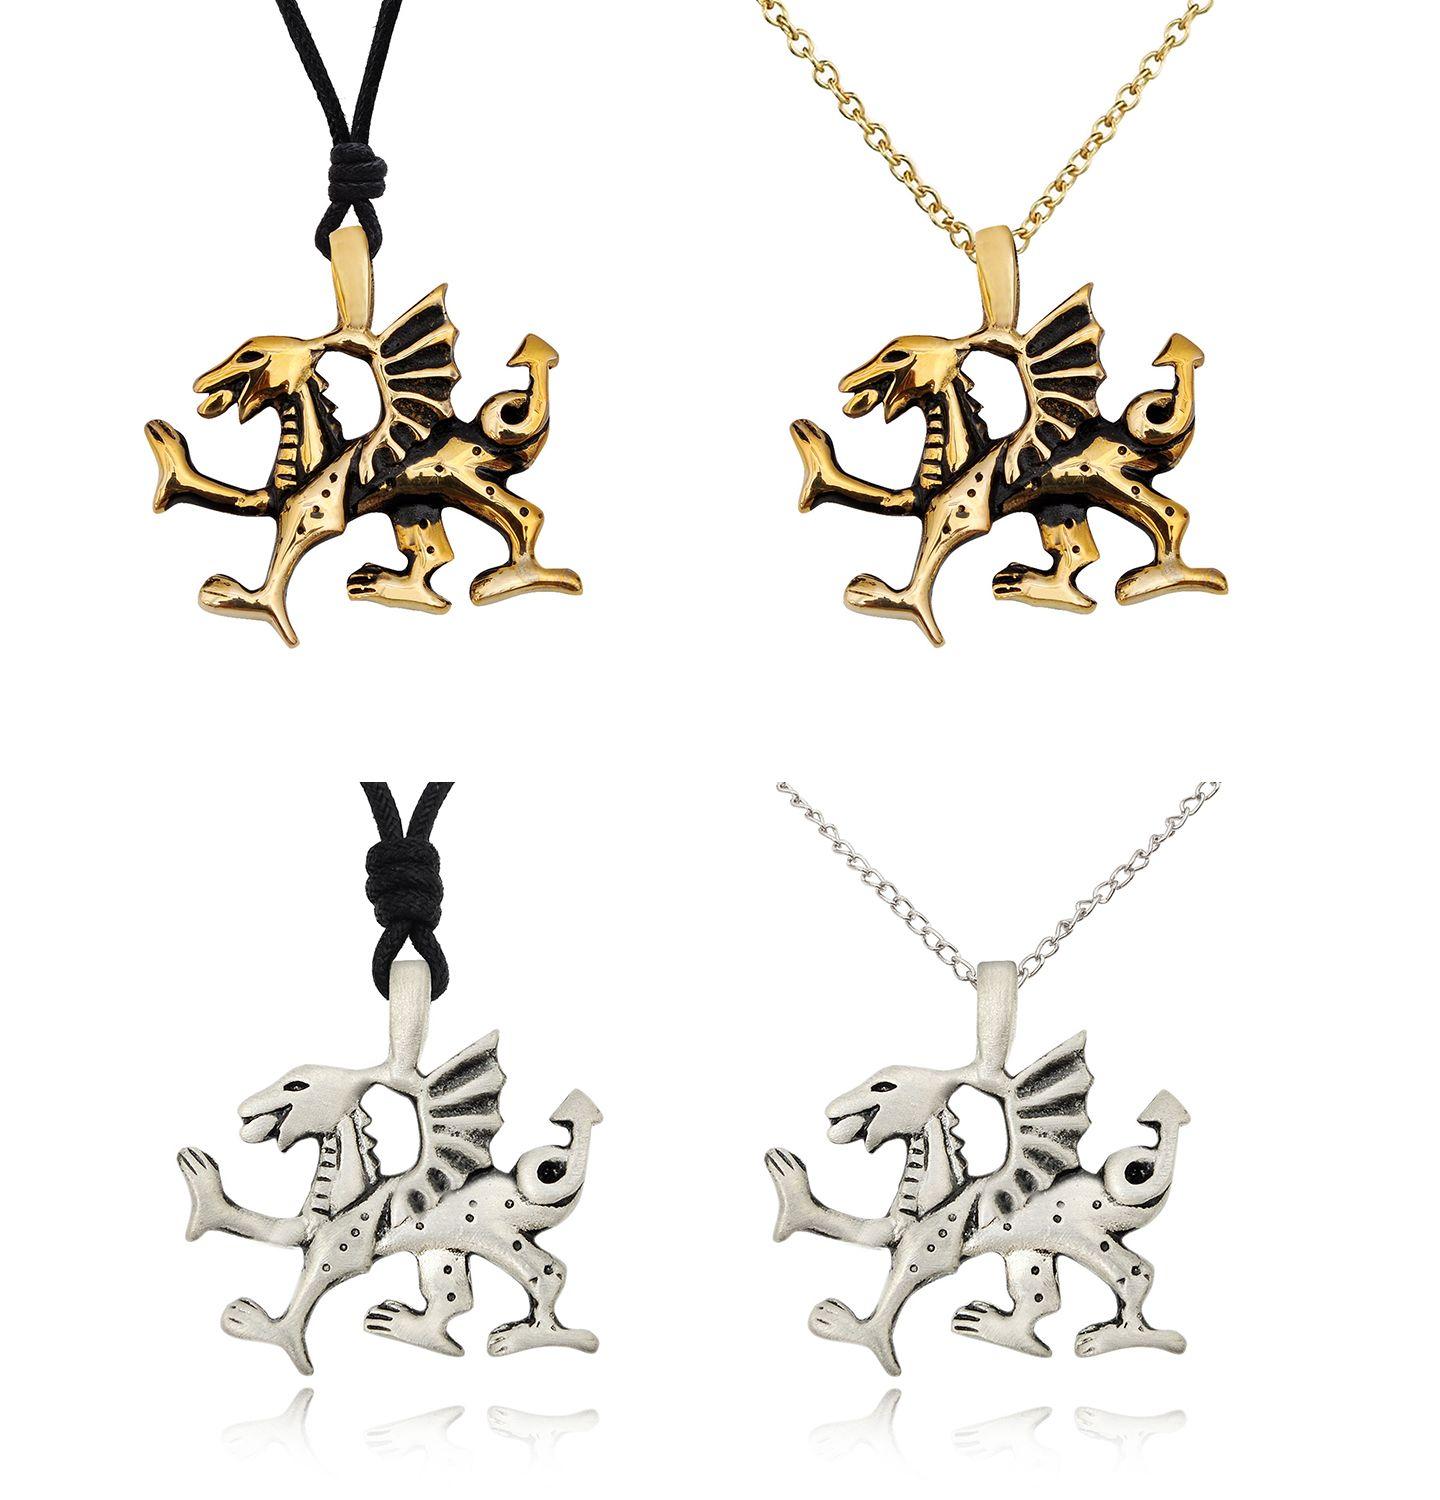 Gold Dragon Crest Logo - Dragon Crest Silver Pewter Gold Brass Charm Necklace Pendant Jewelry ...